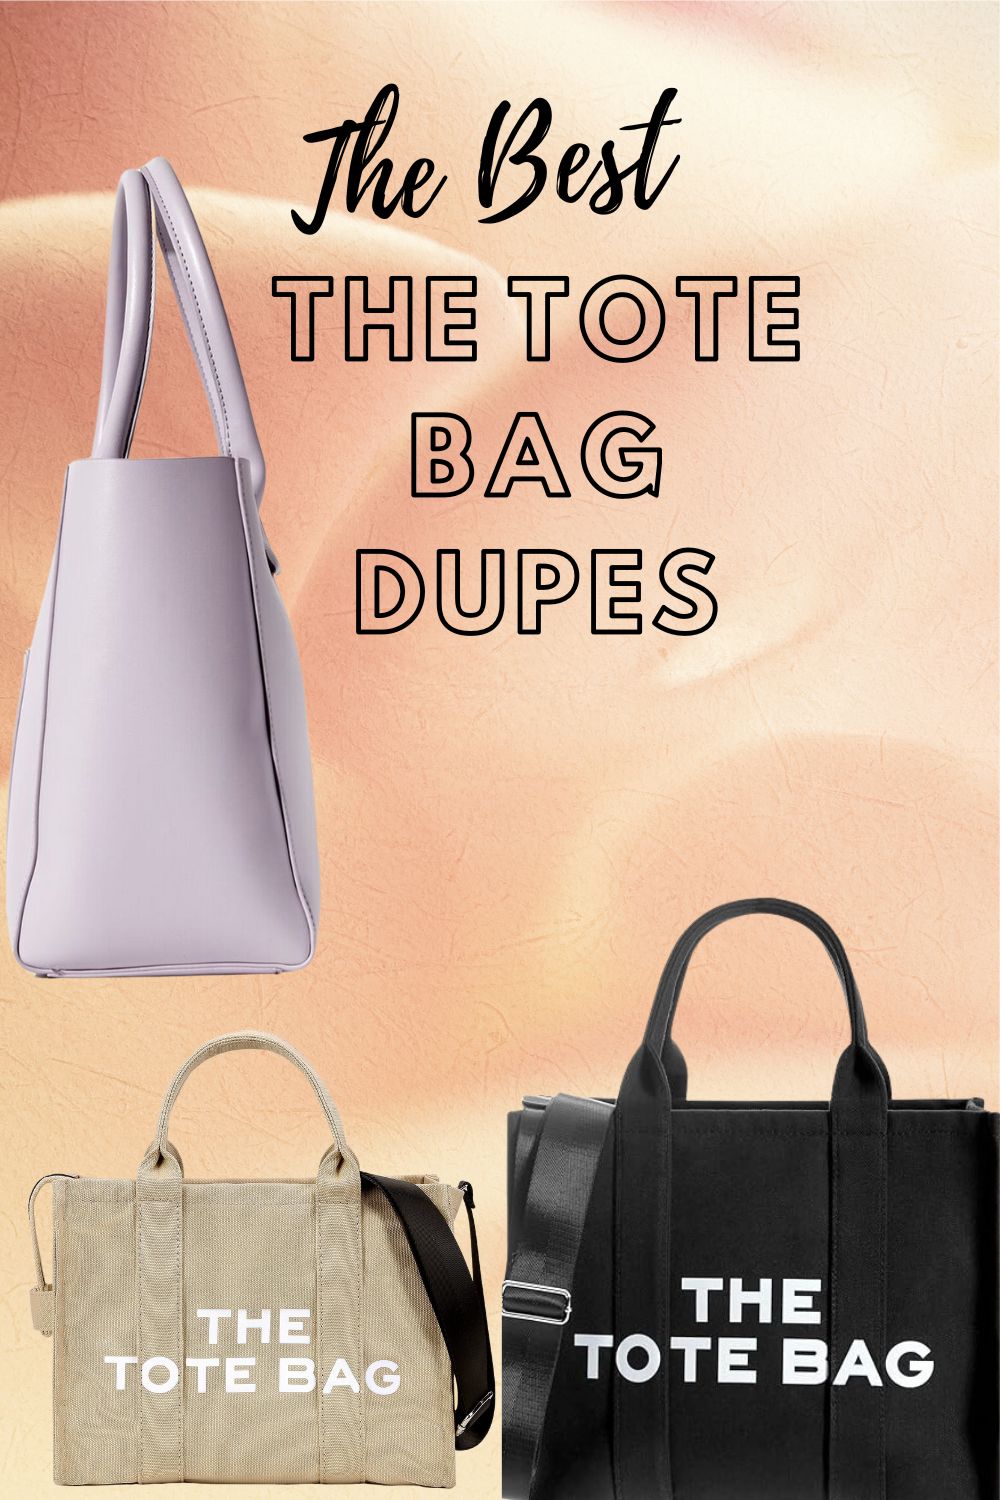 Amazing Marc Jacobs Tote Bag Dupes [Cheap Alternatives] - Sweet Glim